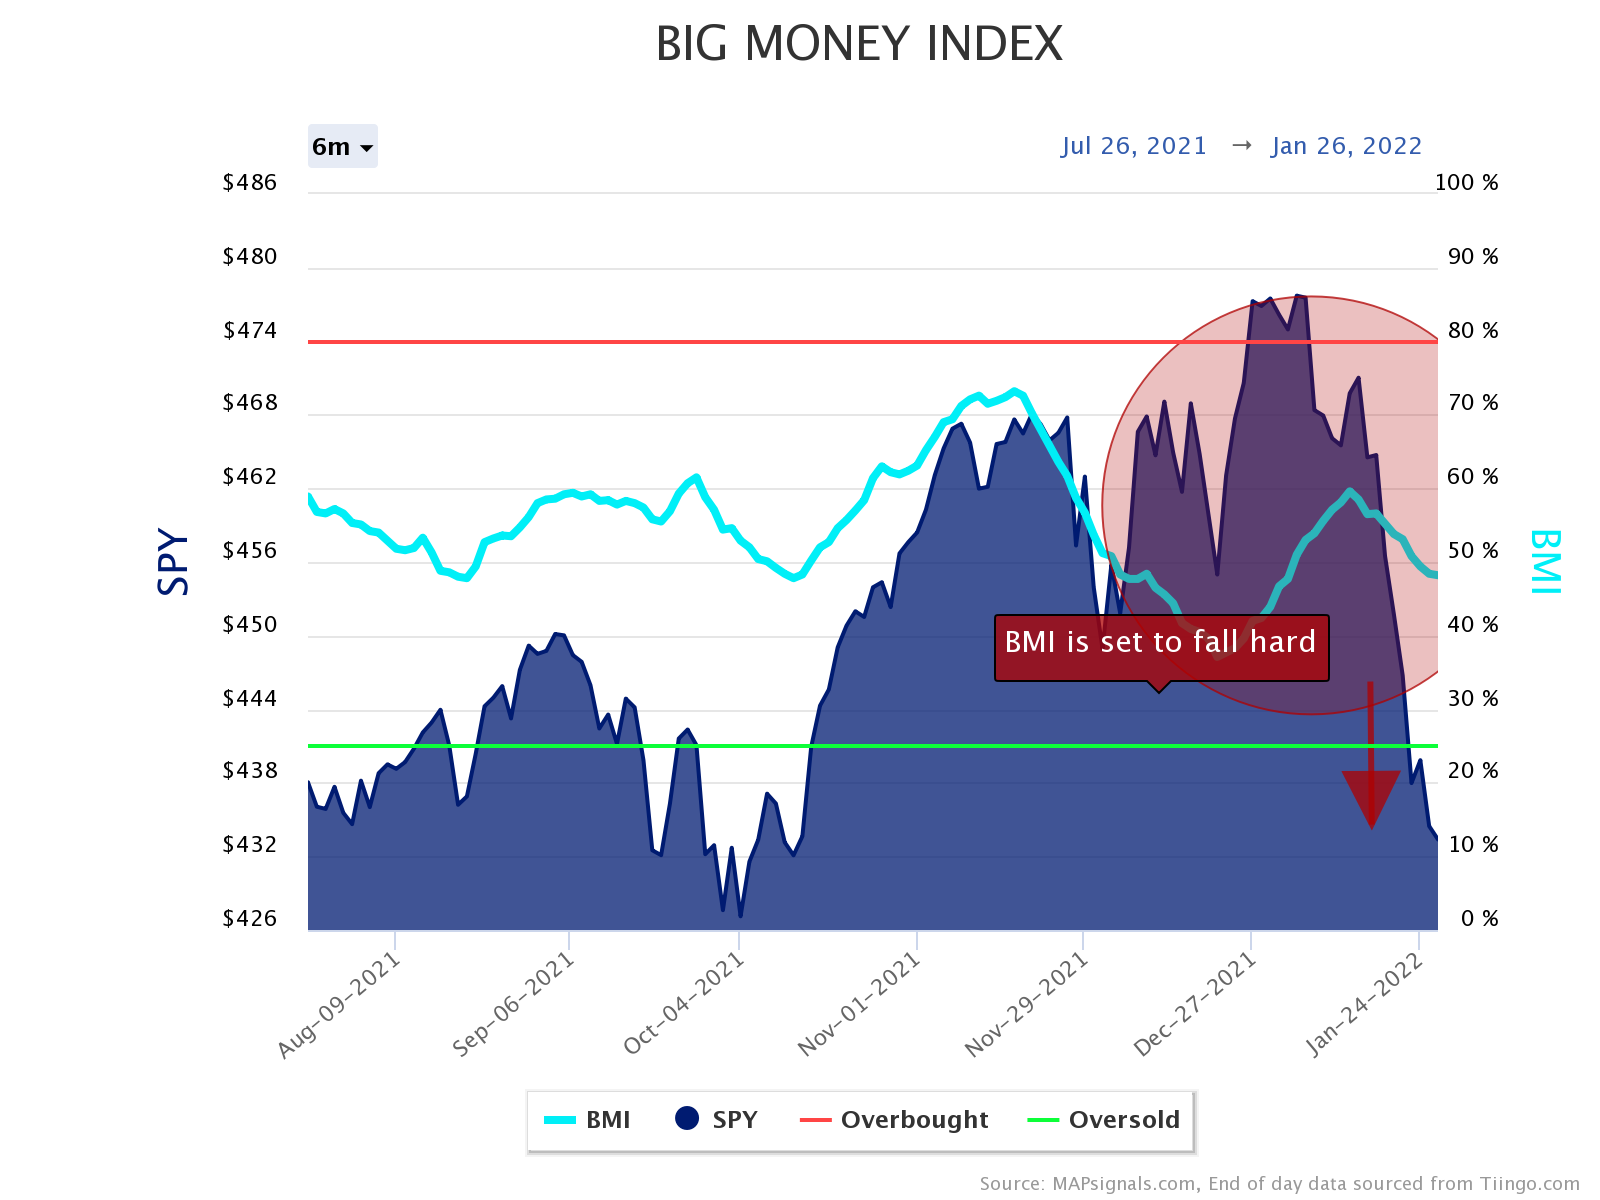 Big Money Index Is About To Fall Hard